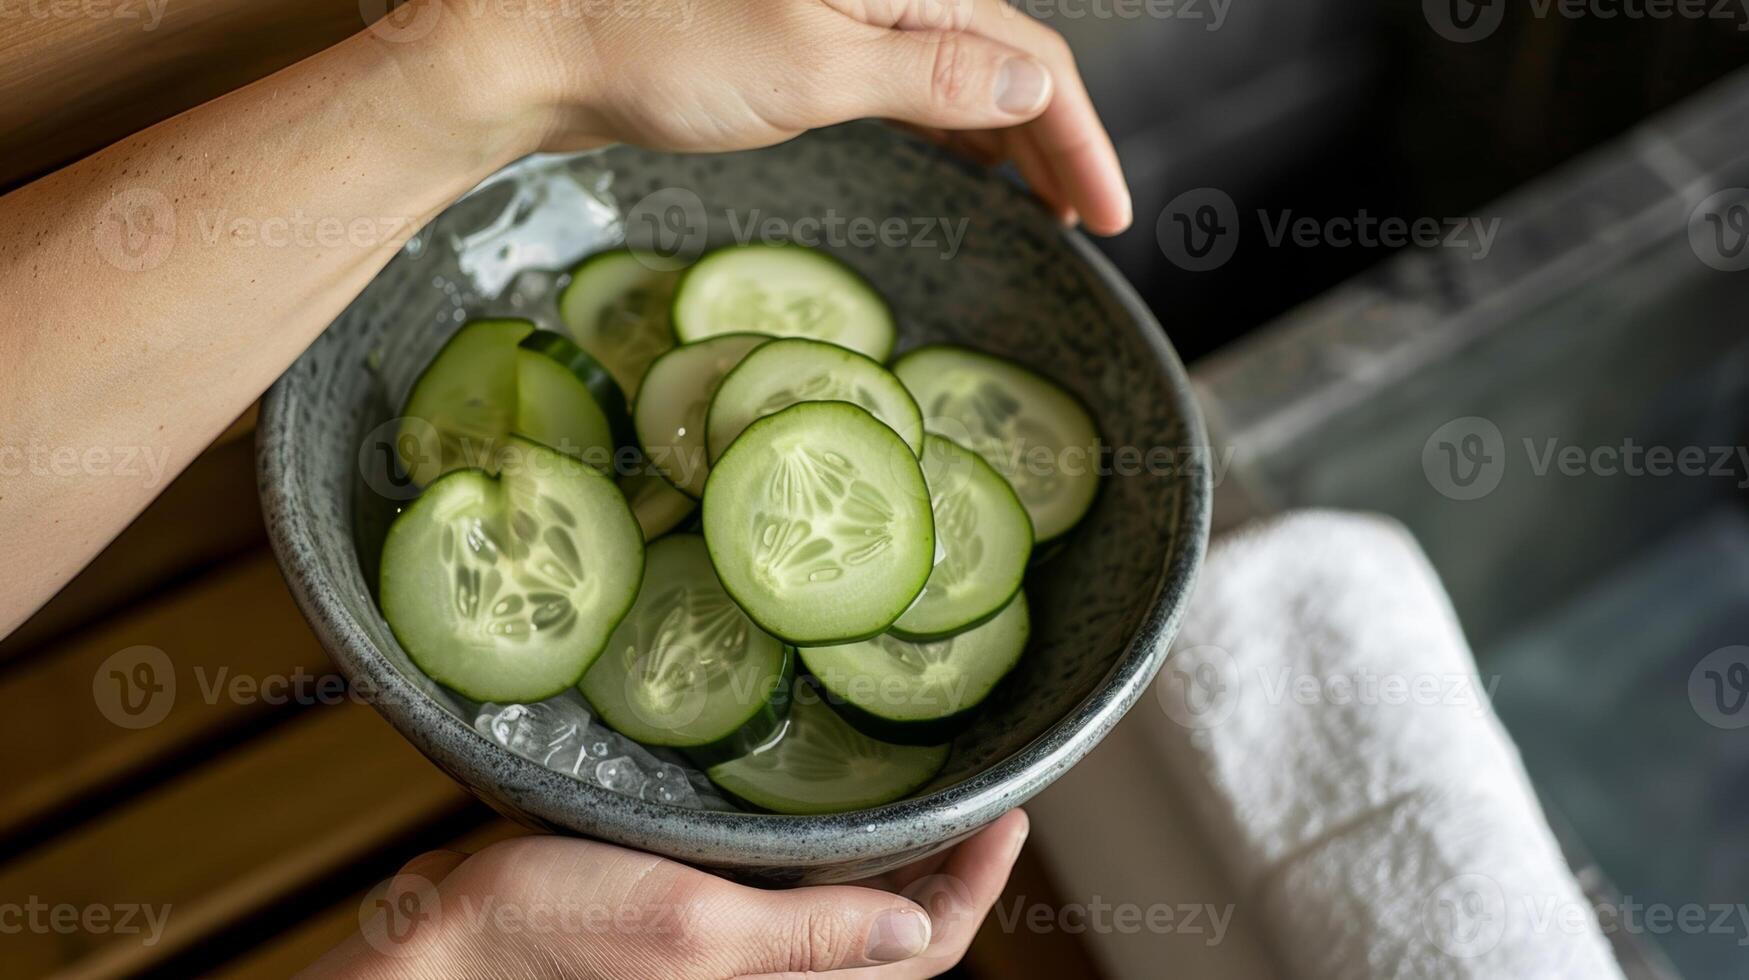 A hand reaches out to grab a fresh cucumber slice from a bowl next to a sauna ready to place it on their face for a refreshing natural exfoliation treatment. photo